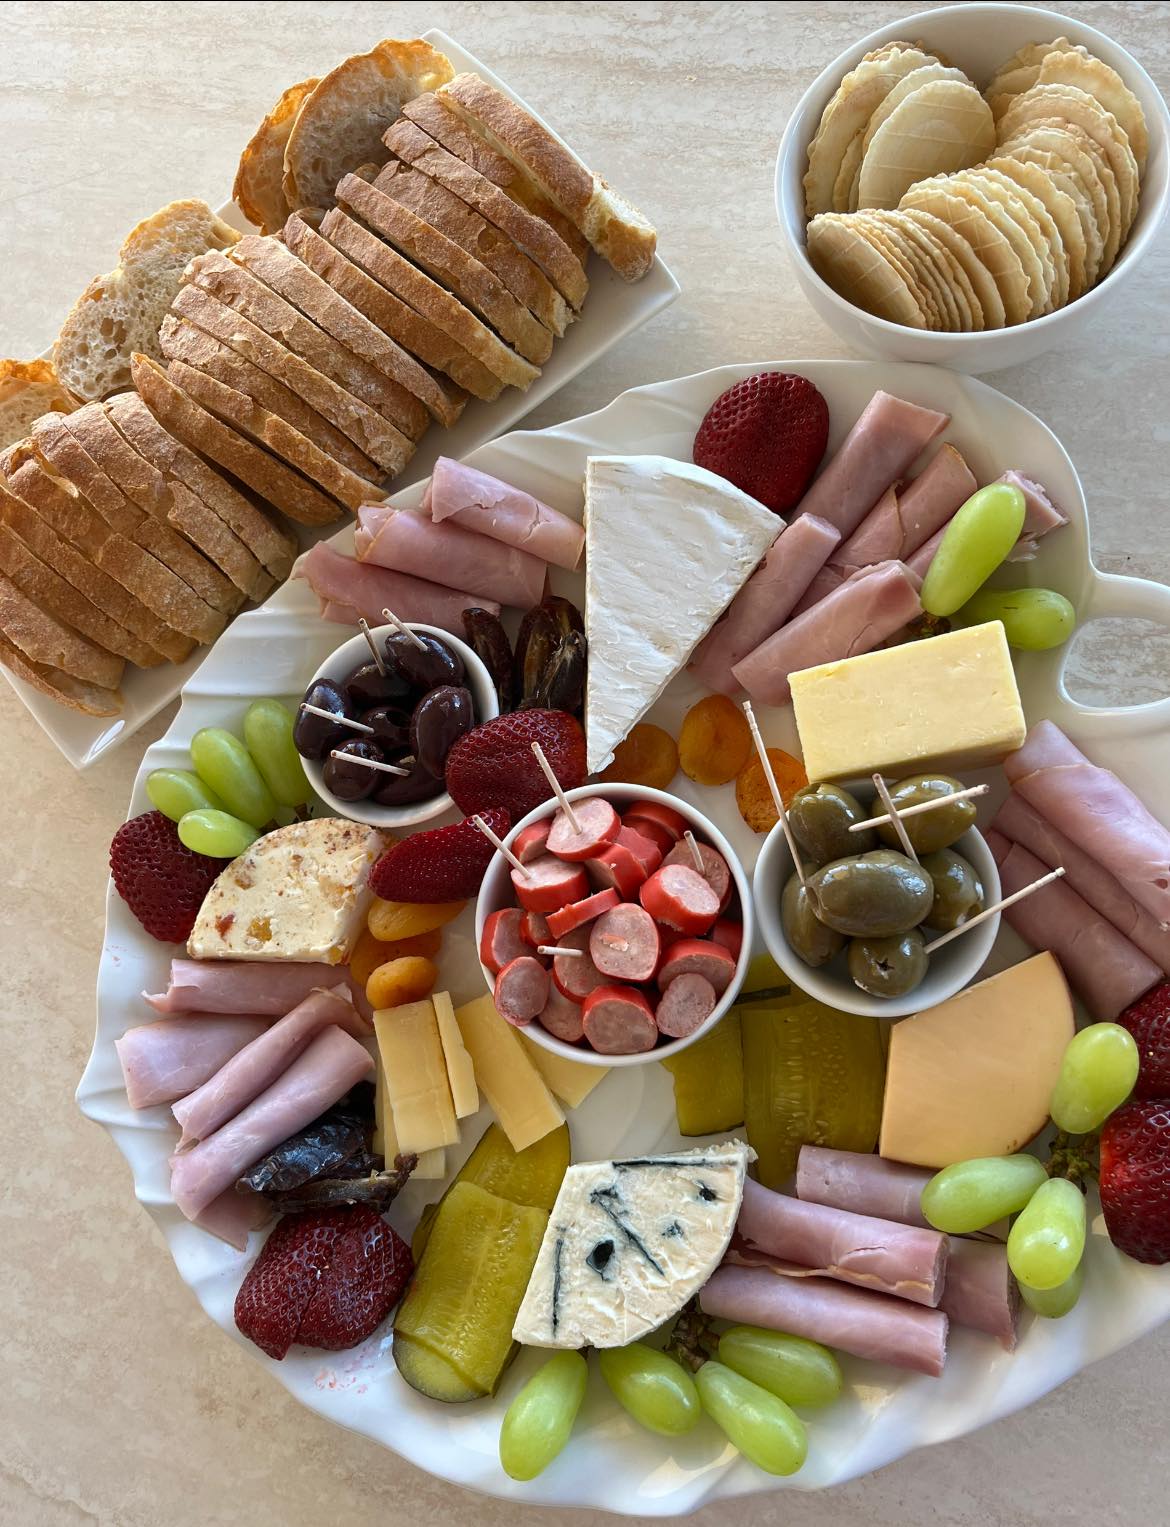 Featured image for “Cheese Platter for 4”